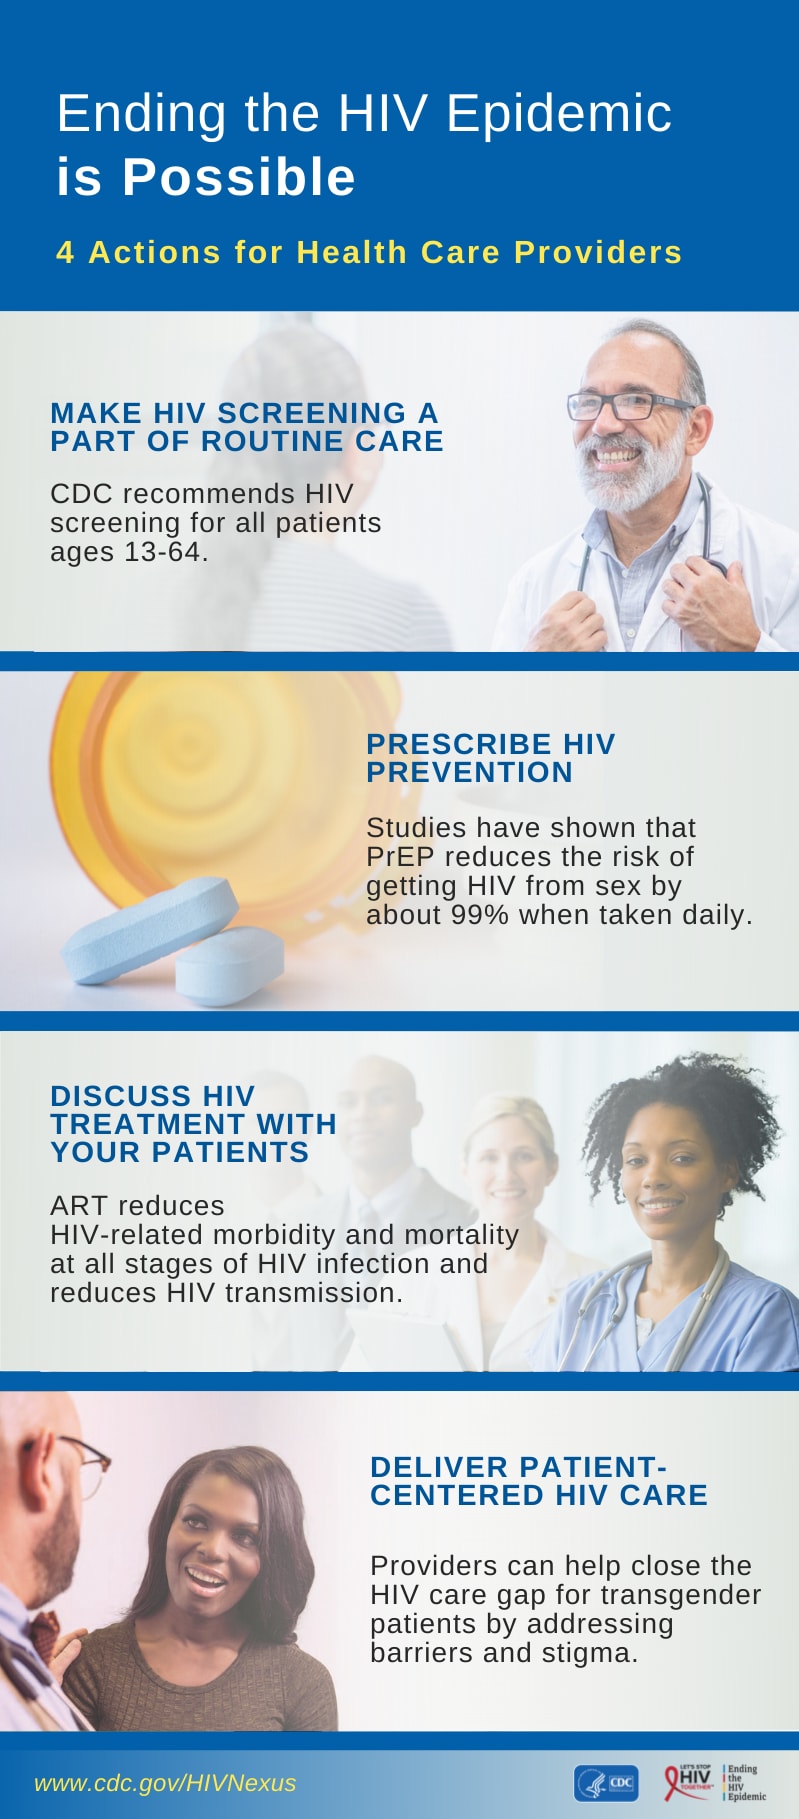 Ending the HIV Epidemic is Possible. 4 Actions for Health Care Providers